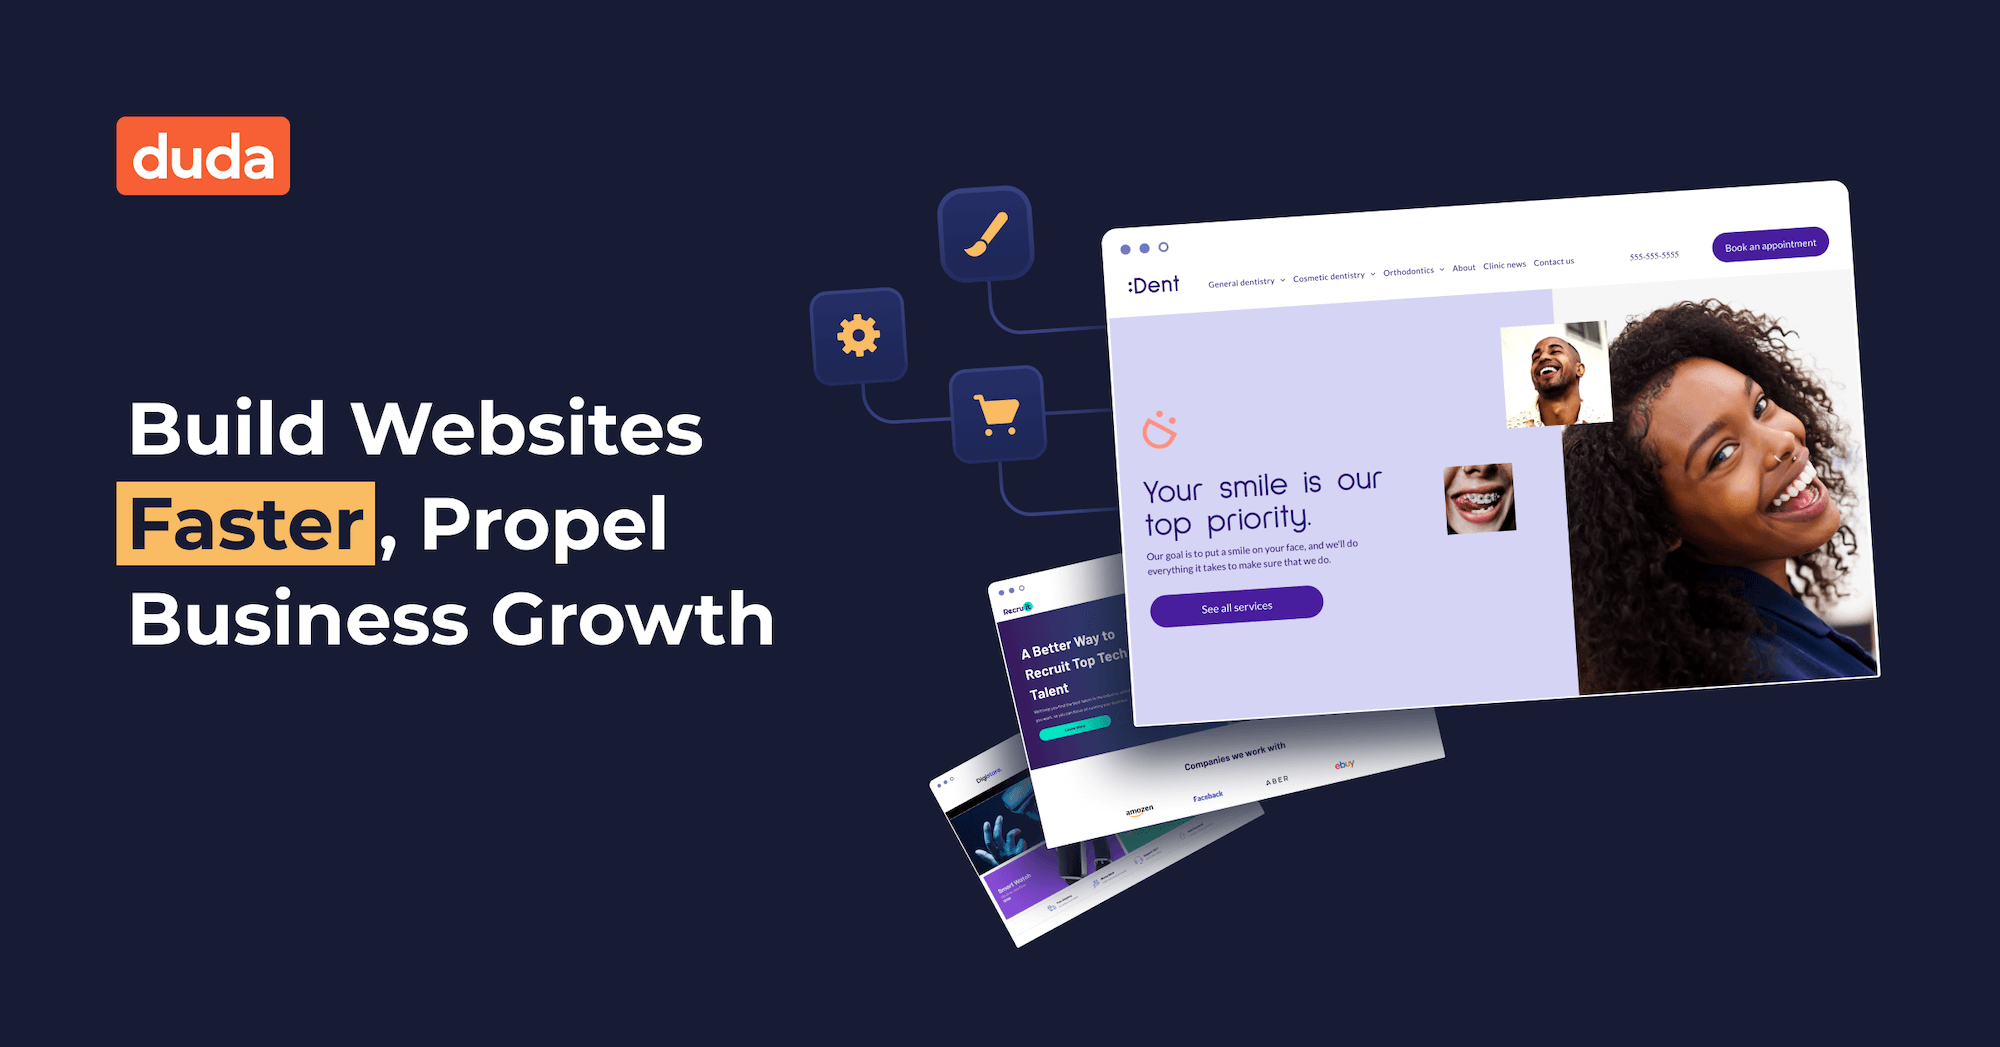 "Build websites faster, propel business growth"